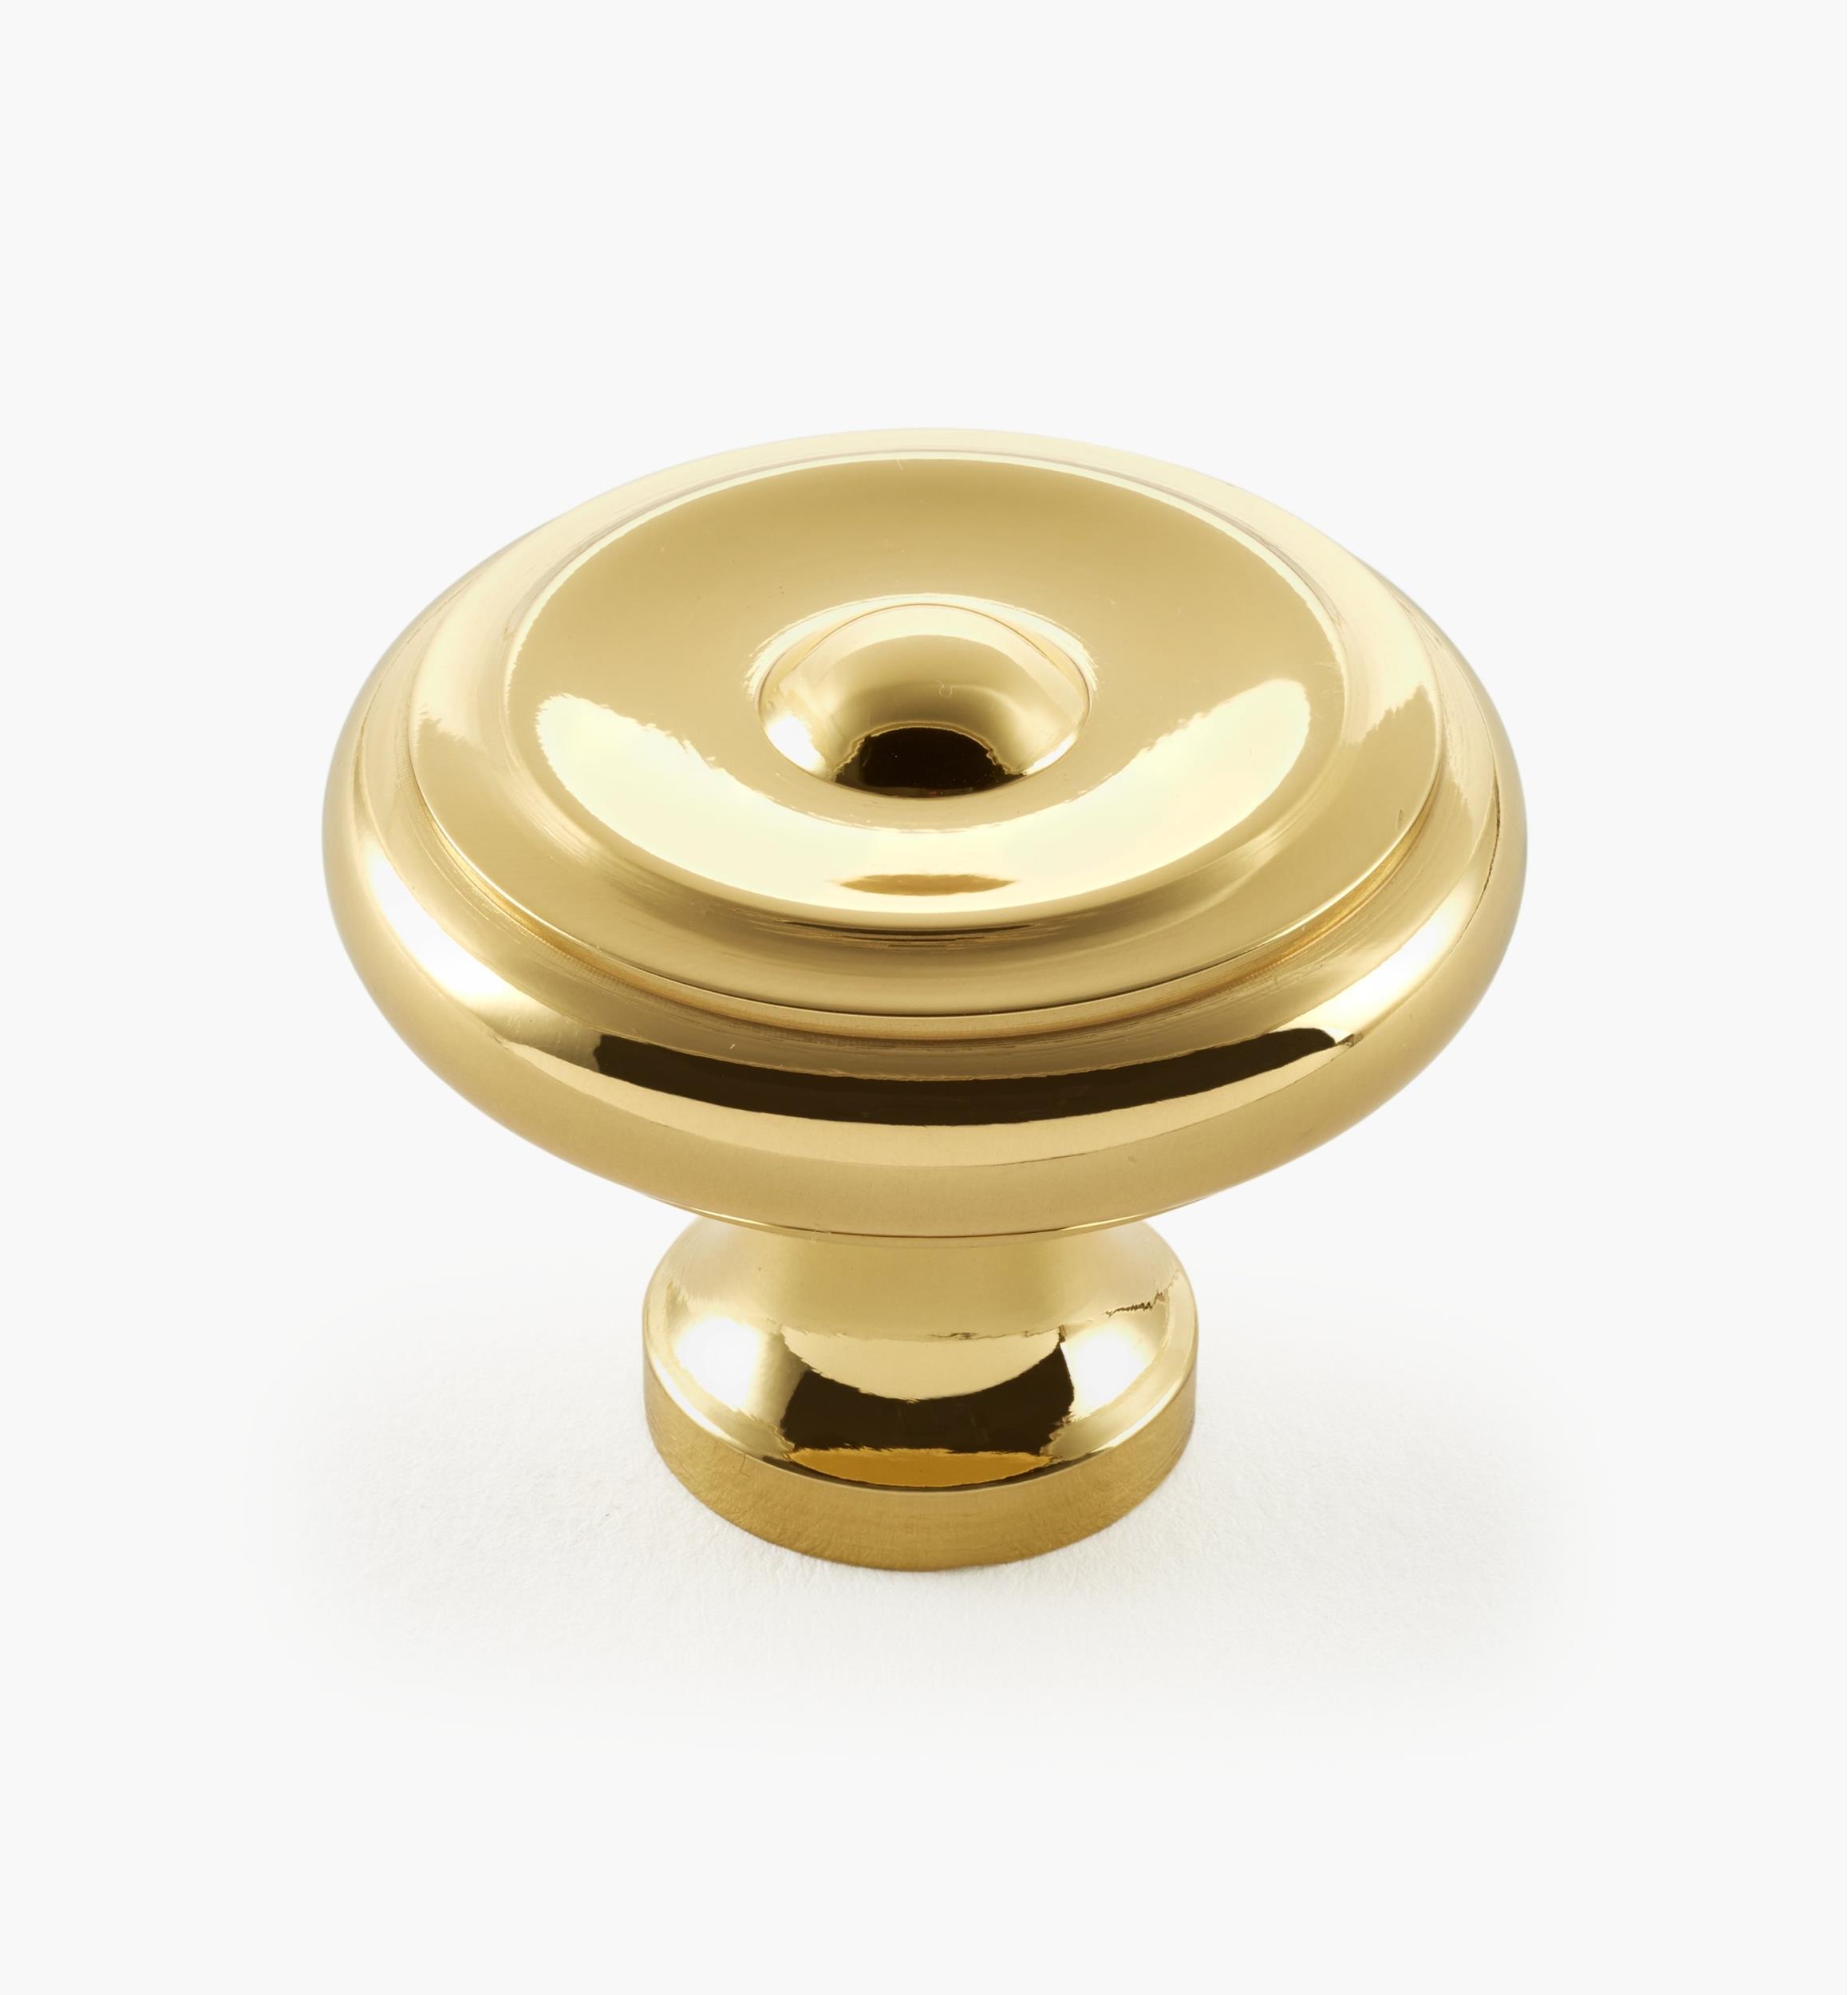 https://assets.leevalley.com/Size5/10086/03W1307-brass-liberty-1-1-2-inch-x-1-1-4-inch-top-rings-knob-ea-f-59.jpg